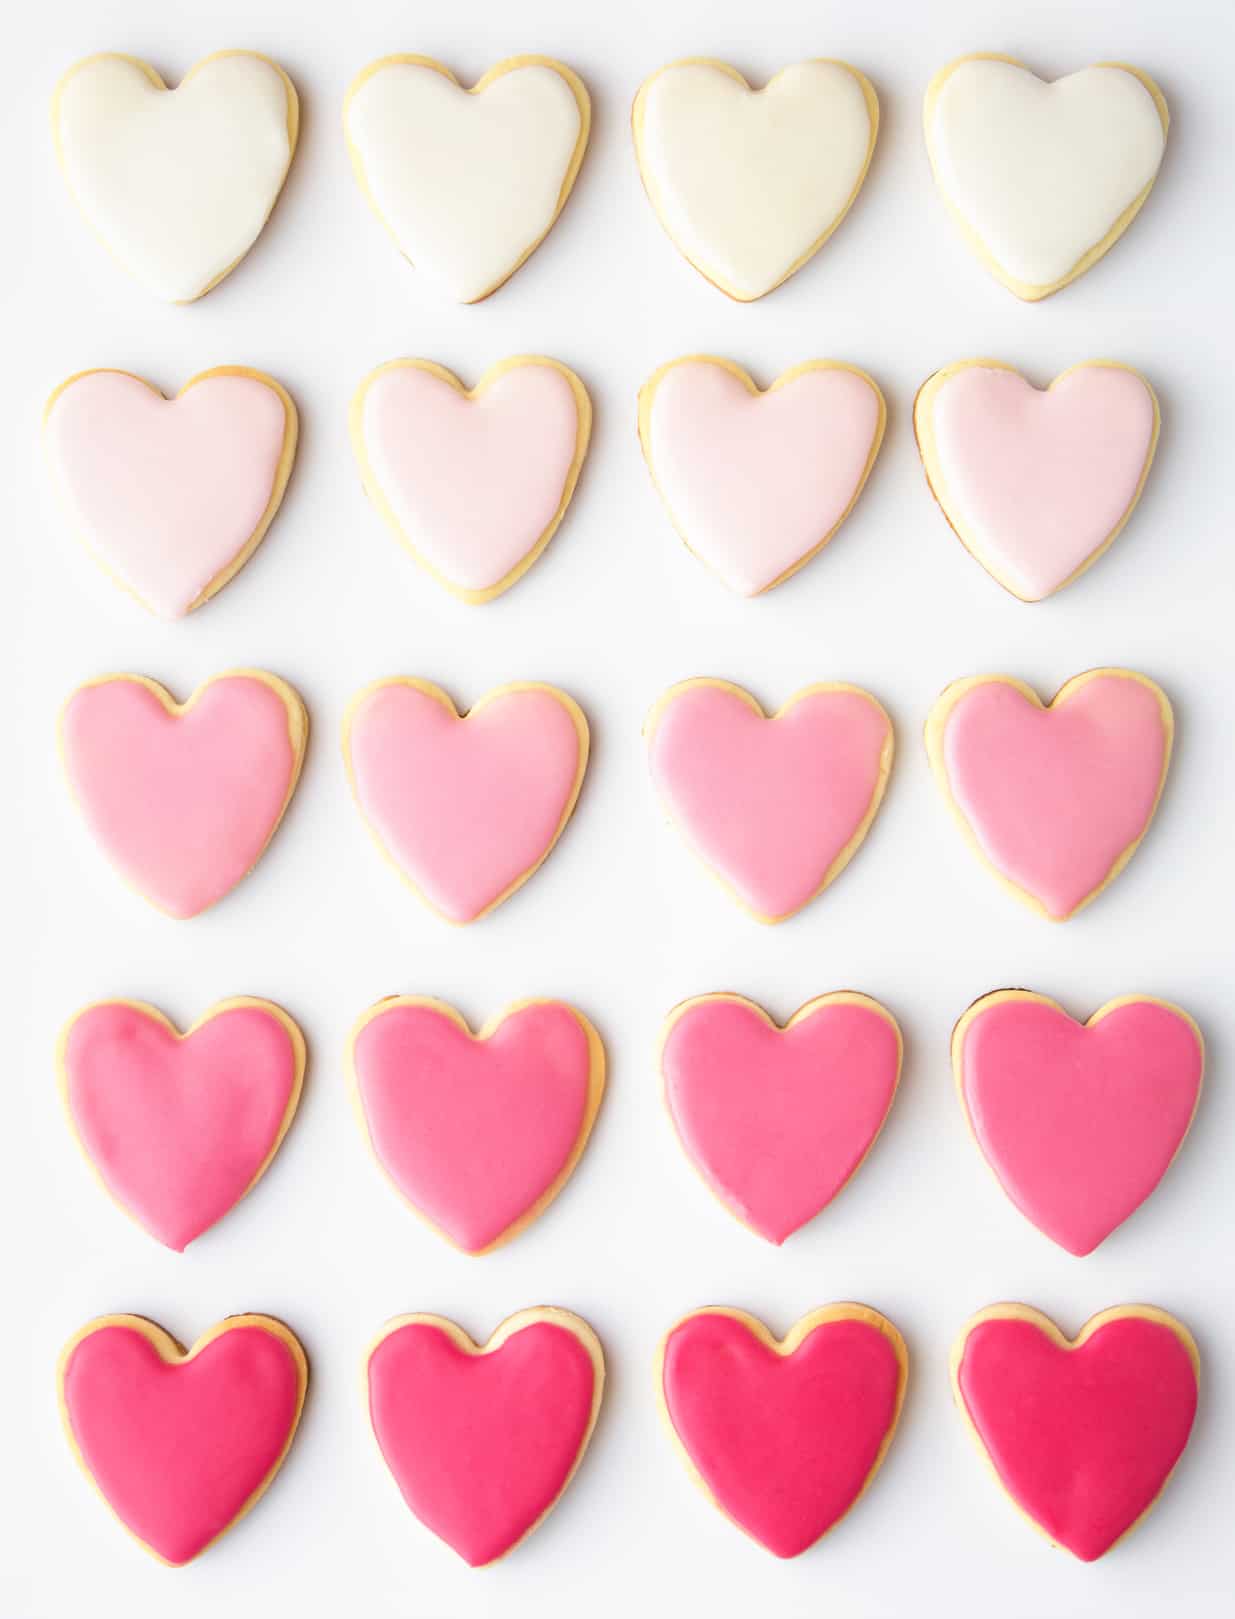 Valentine's Day Heart Shaped Sugar Cookies Recipe